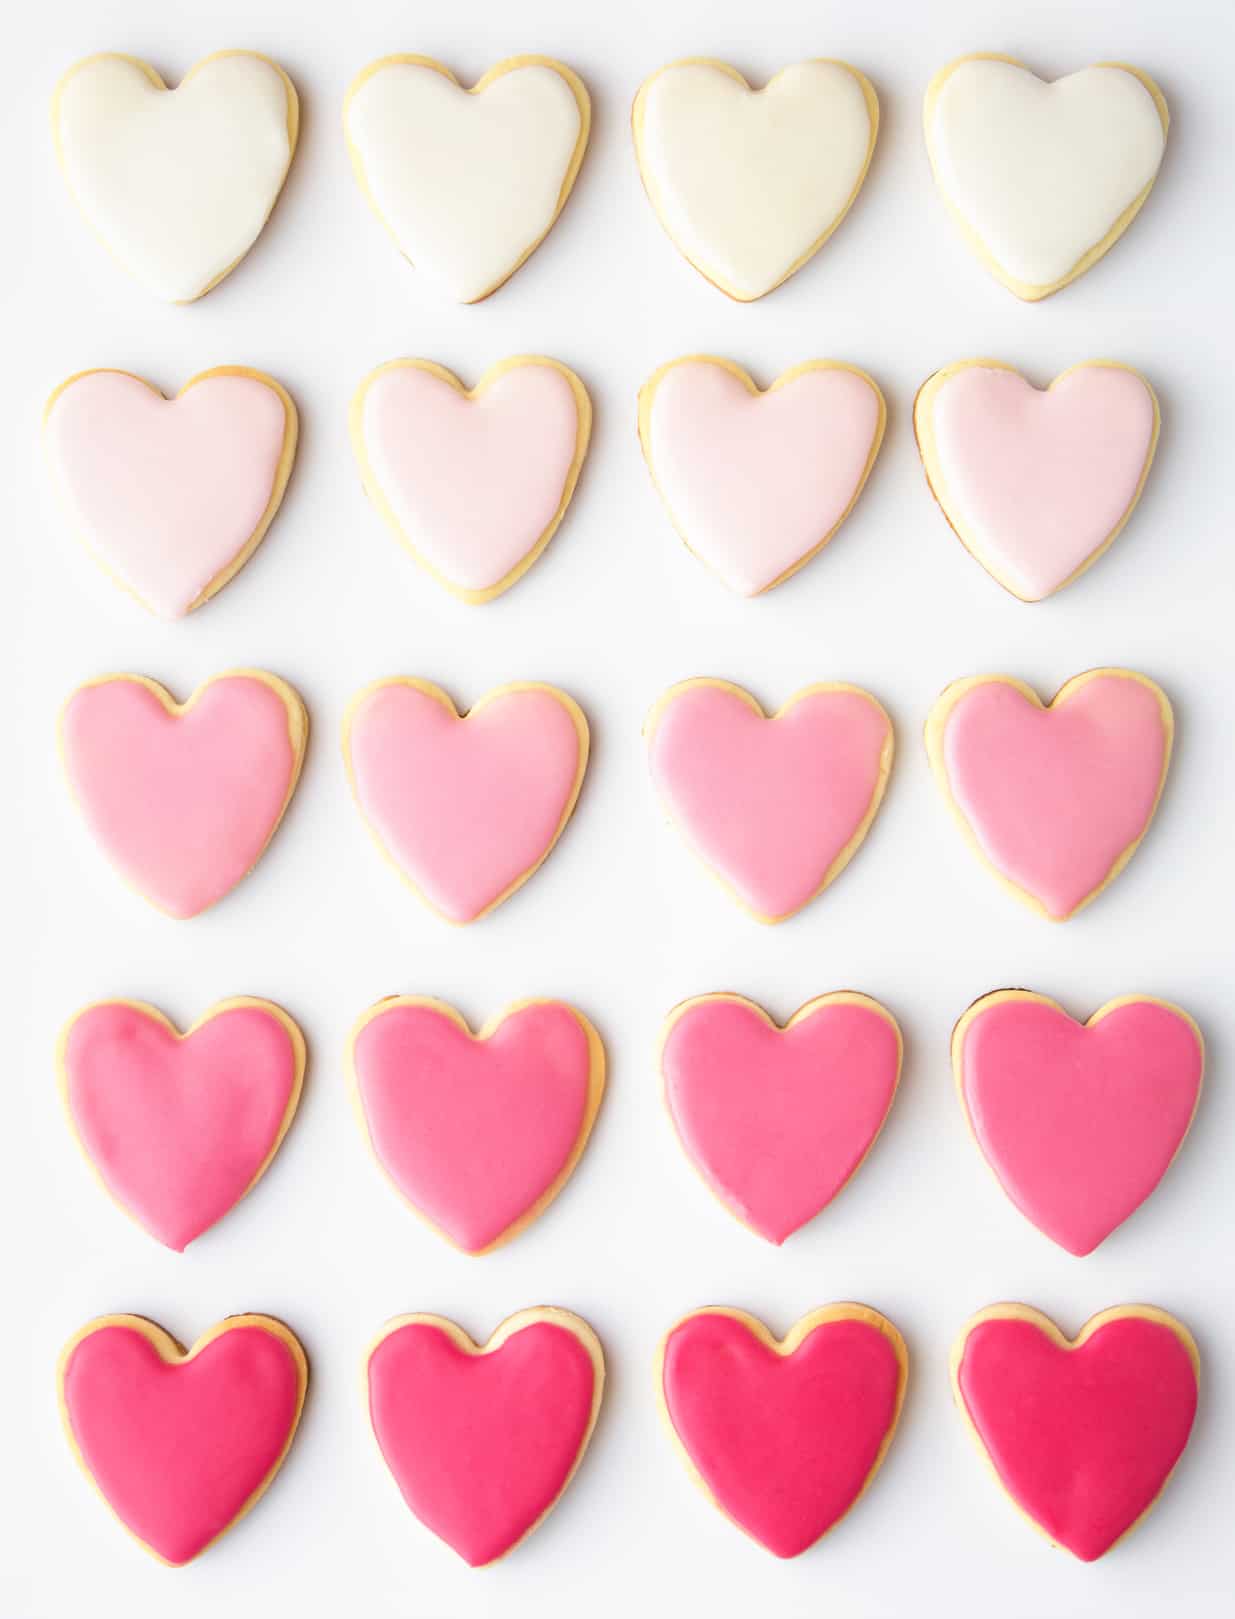 Valentine's Day Heart Shaped Sugar Cookies Recipe